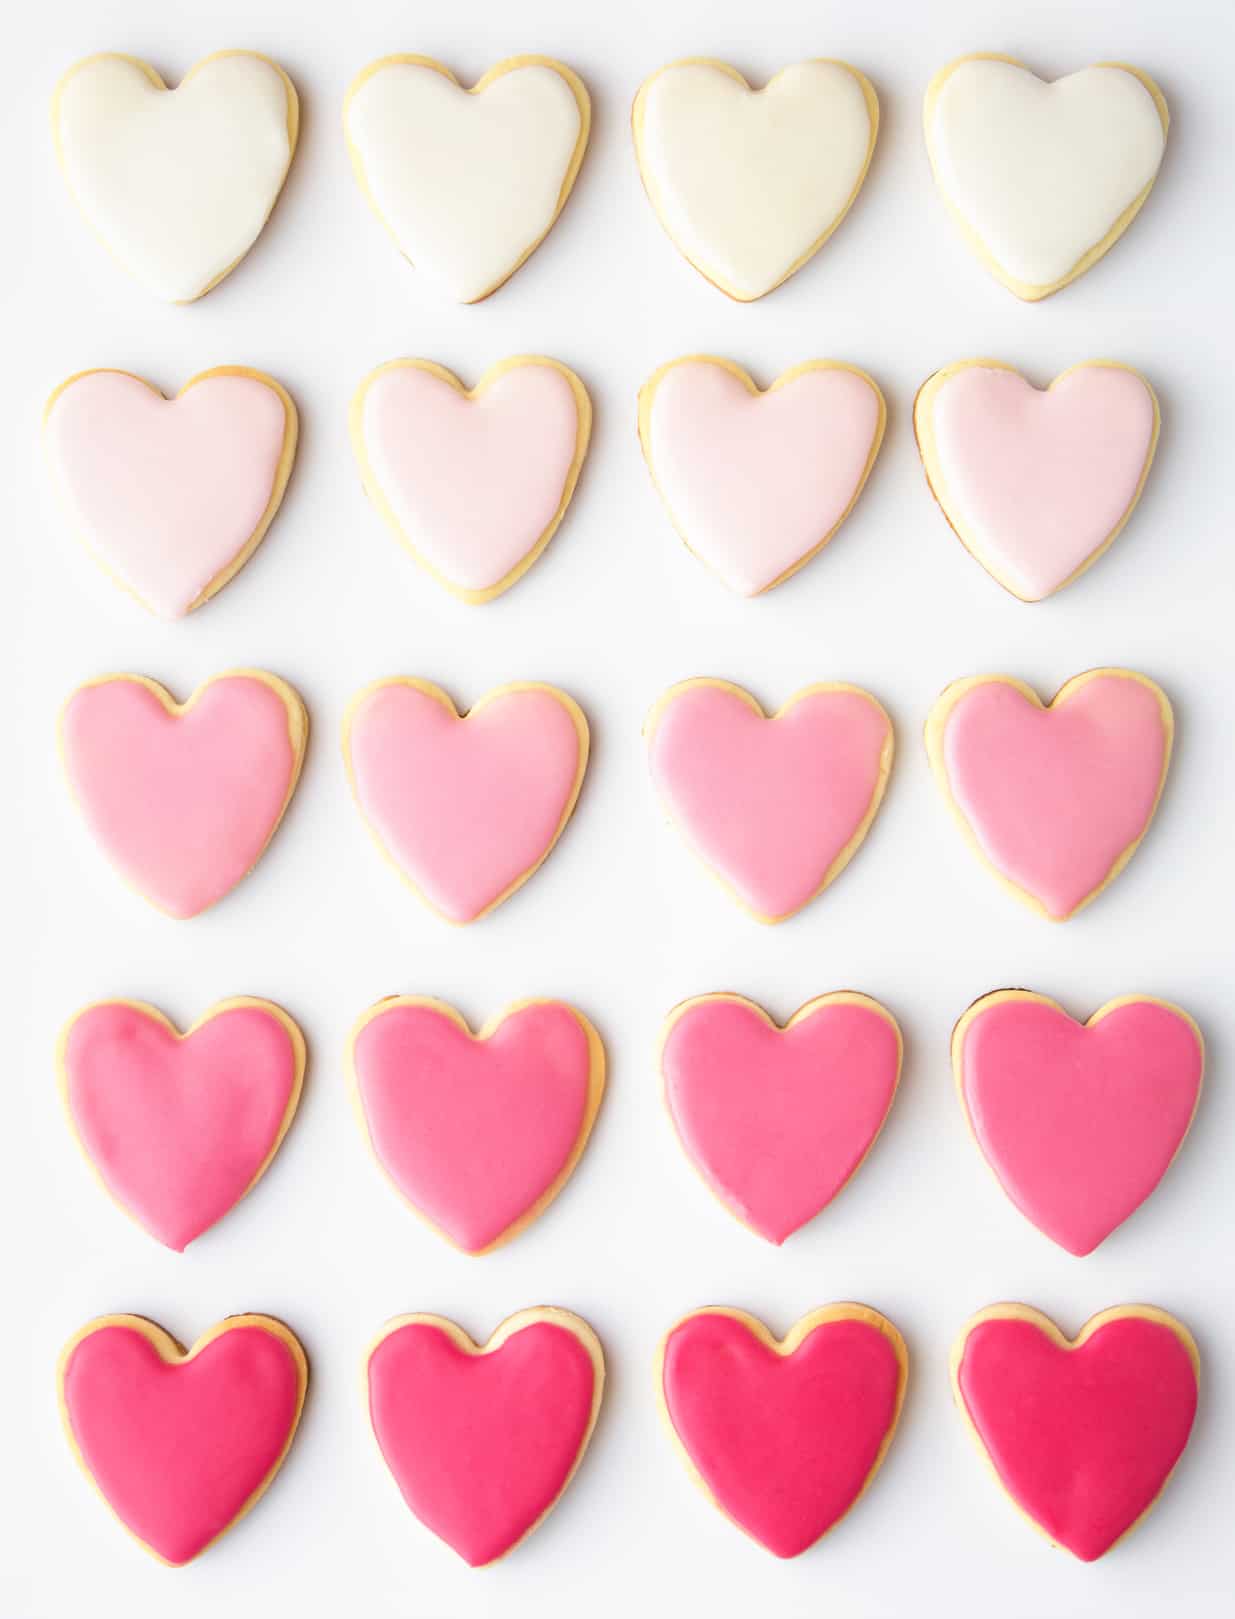 Valentine's Day Heart Shaped Sugar Cookies Recipe